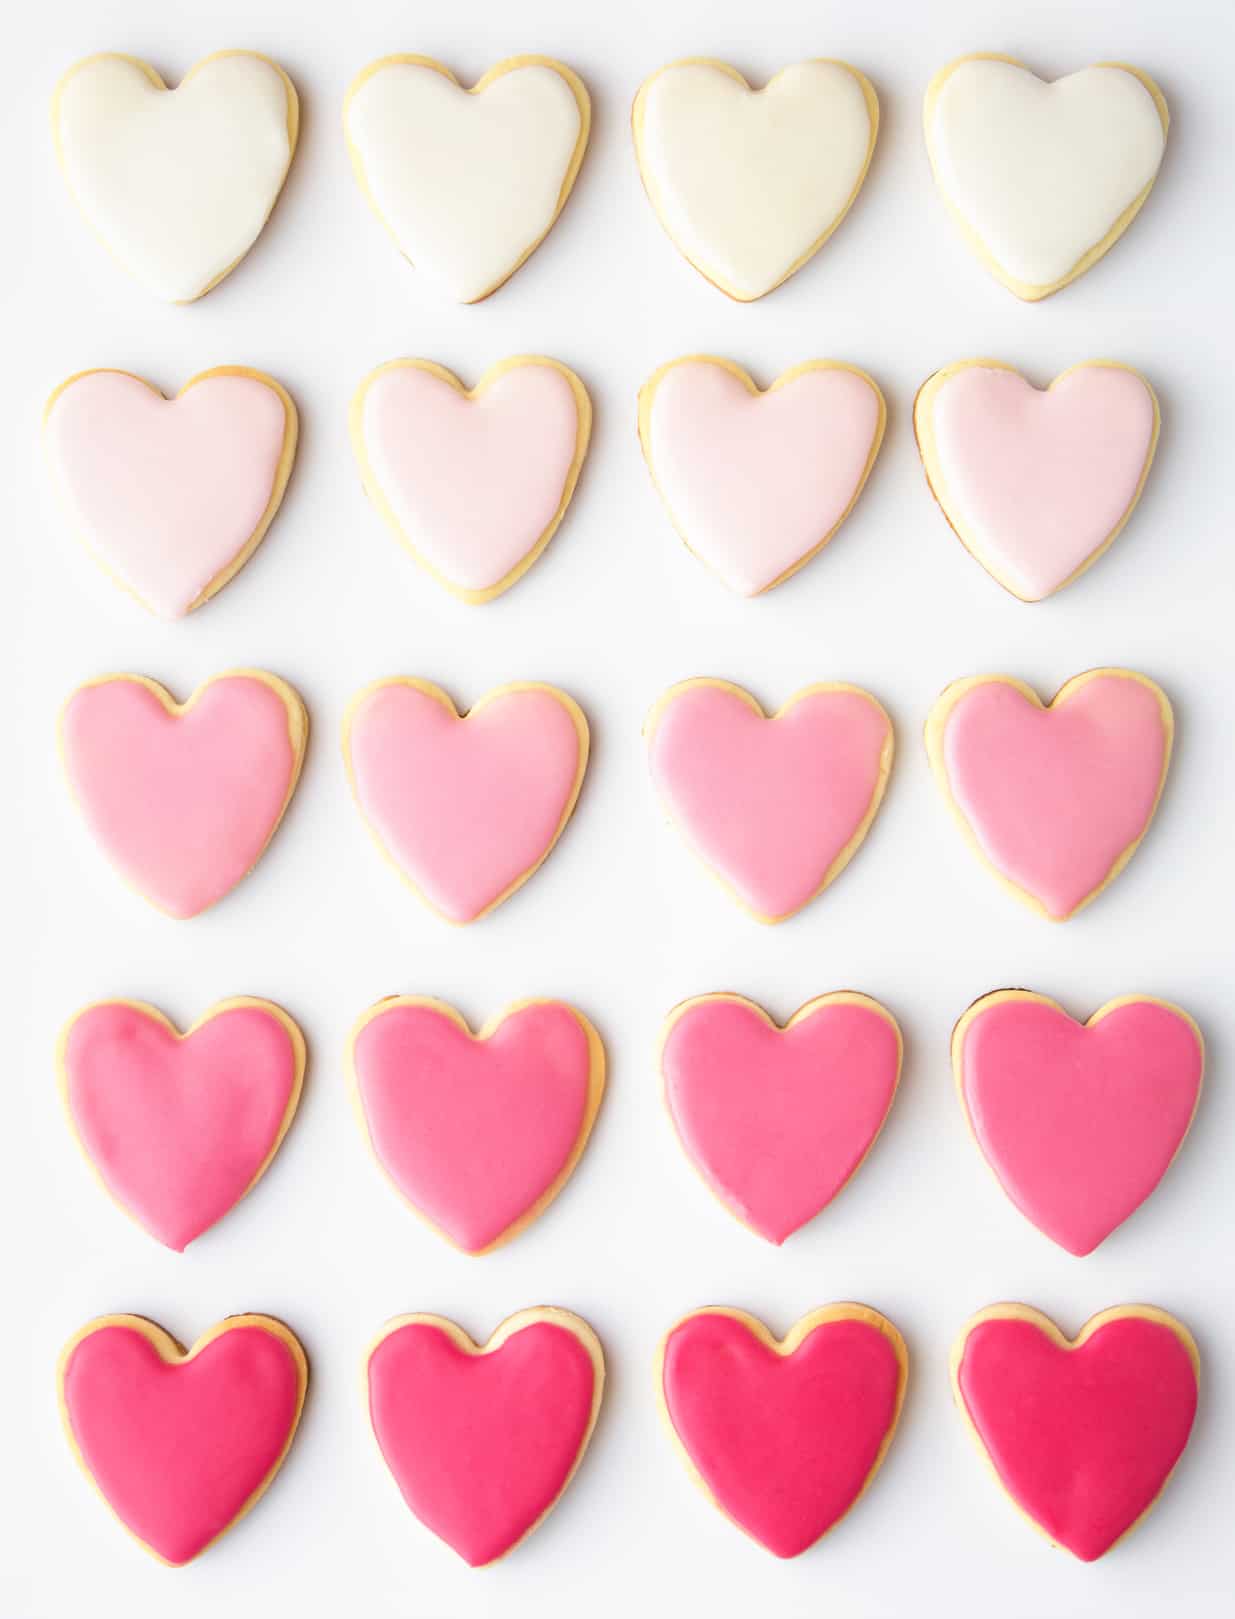 Valentine's Day Heart Shaped Sugar Cookies Recipe